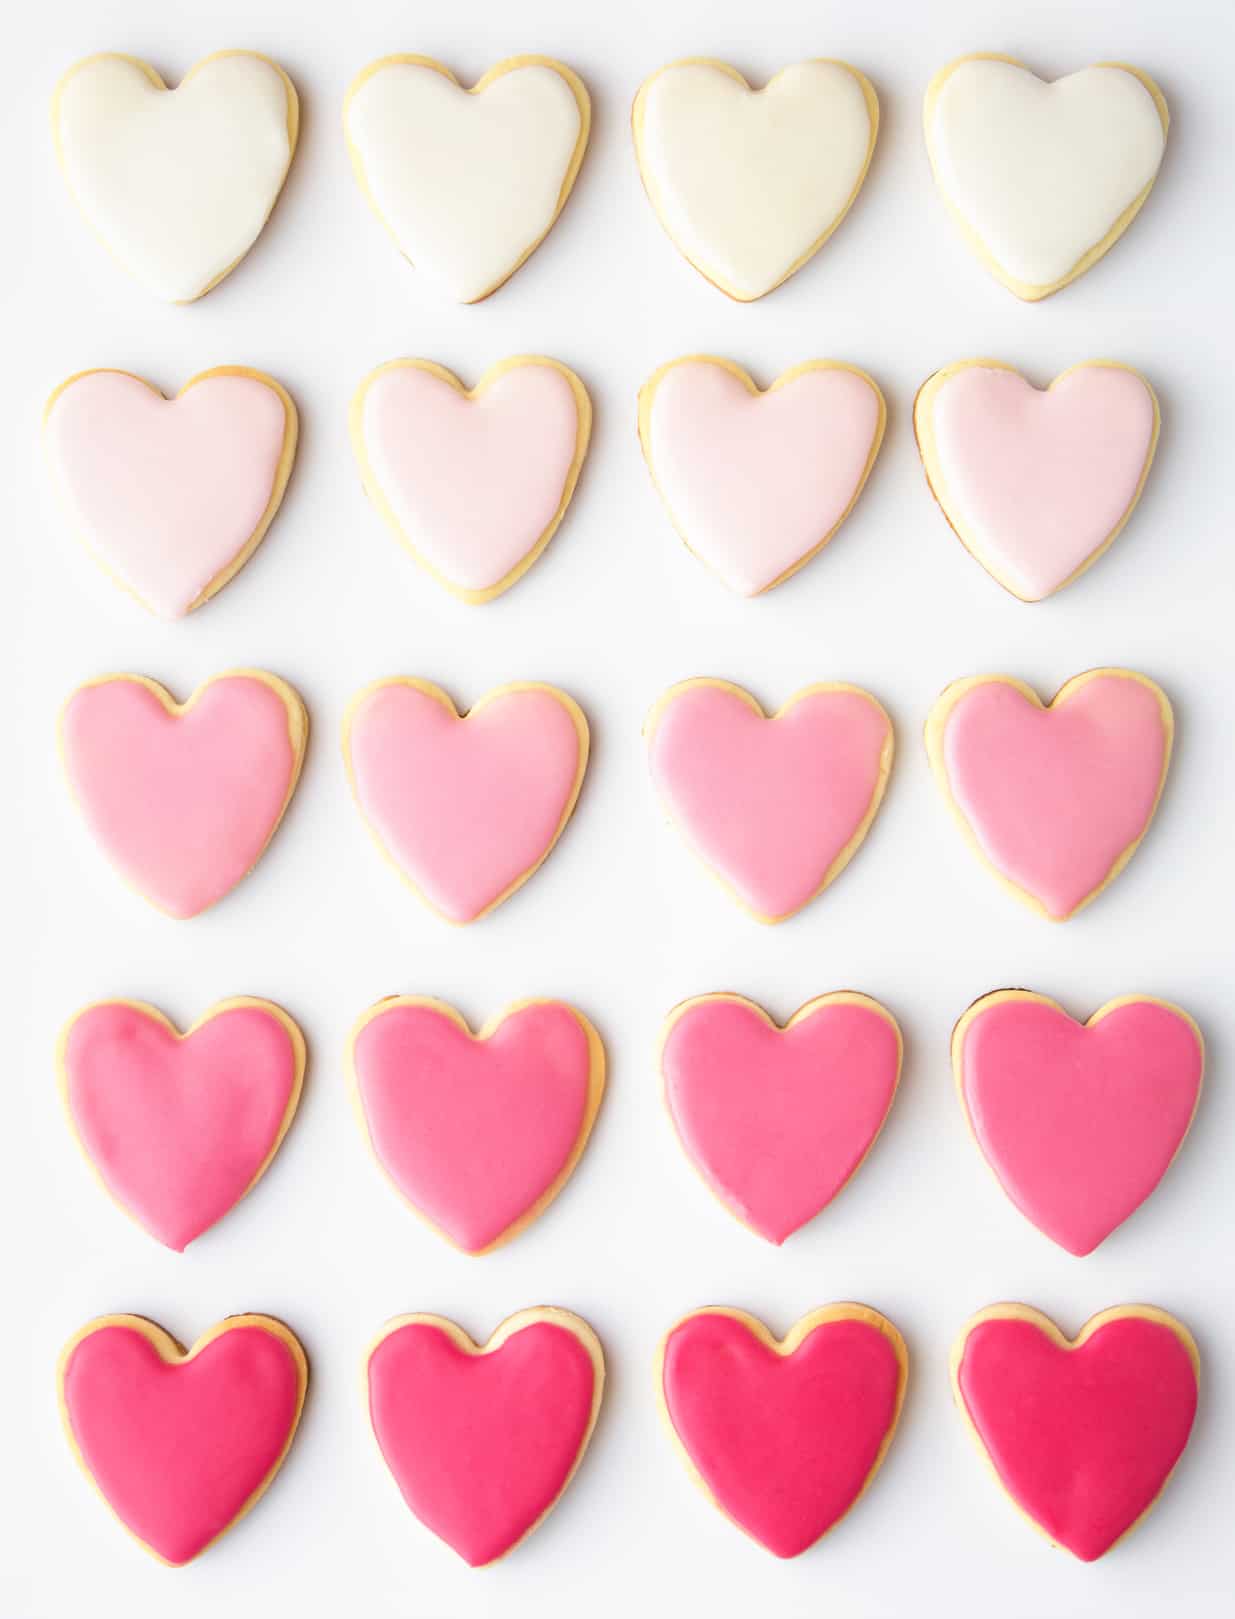 Valentine's Day Heart Shaped Sugar Cookies Recipe